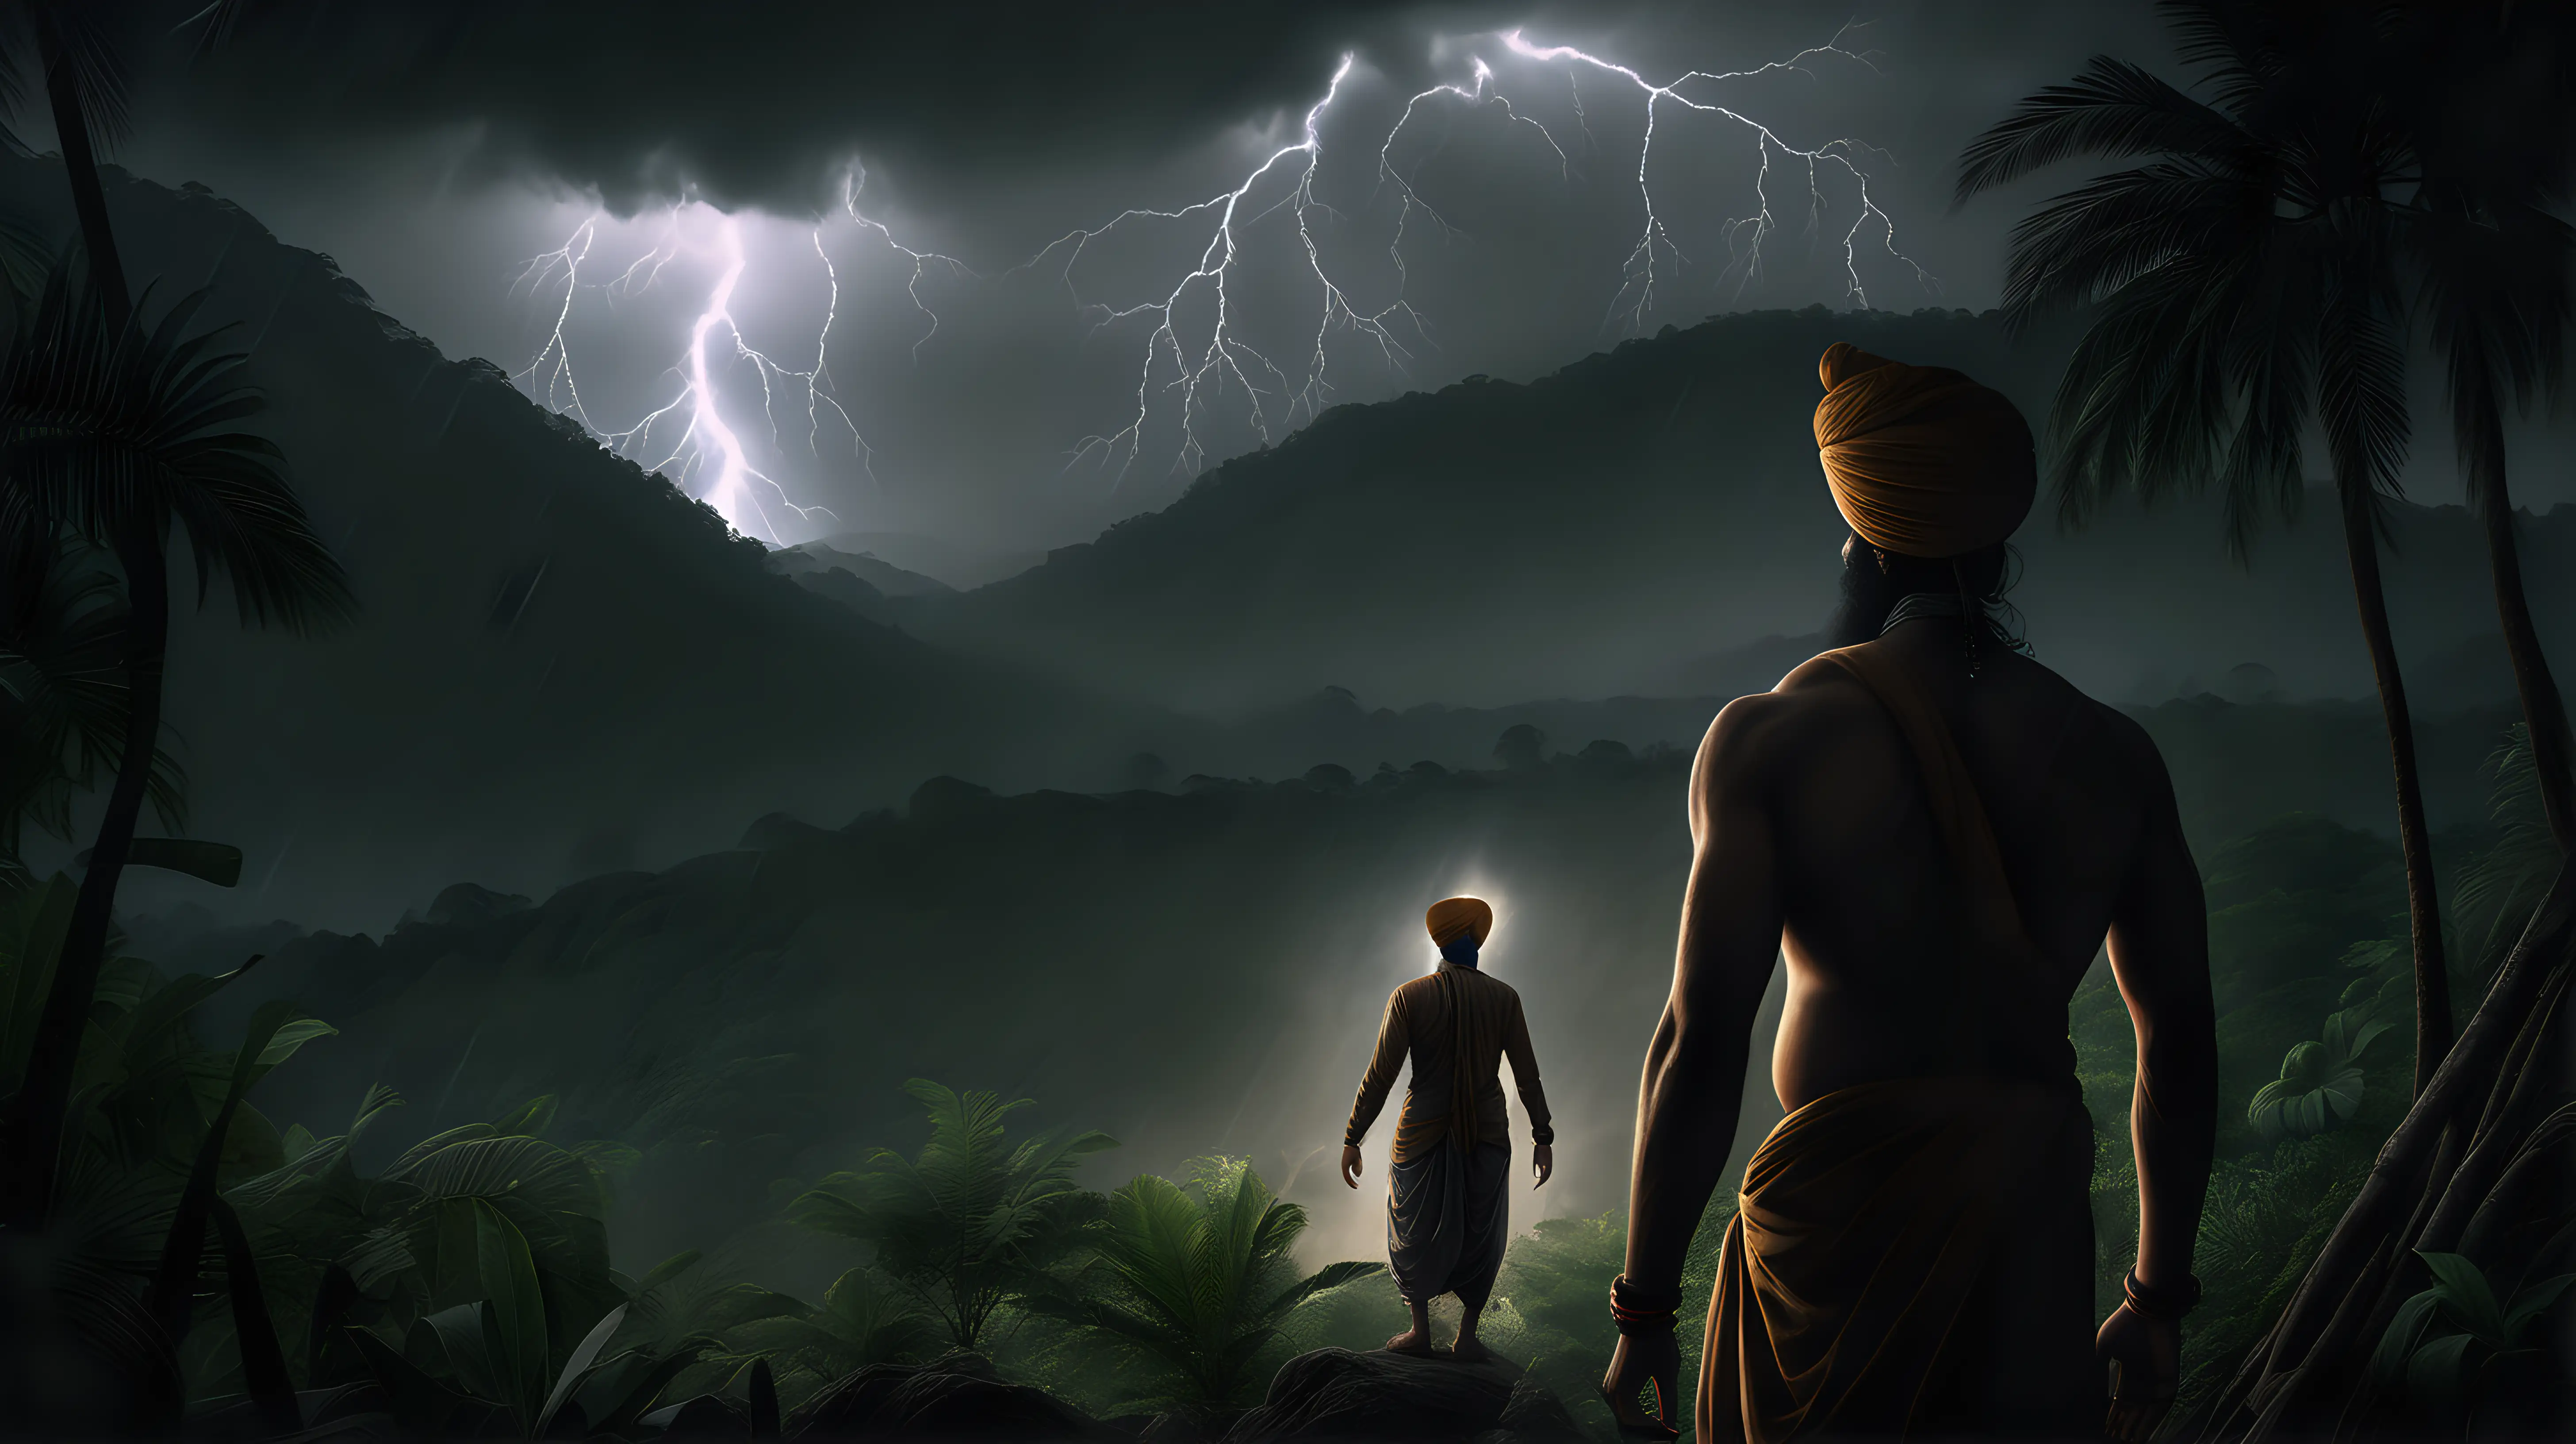 Sikh man in the distance with his back to the camera, no skin showing, Dark, gloomy, lightning strikes in the background, harsh jungle, chiaroscuro enhancing the intricate details, in a digital Rendering “v6”